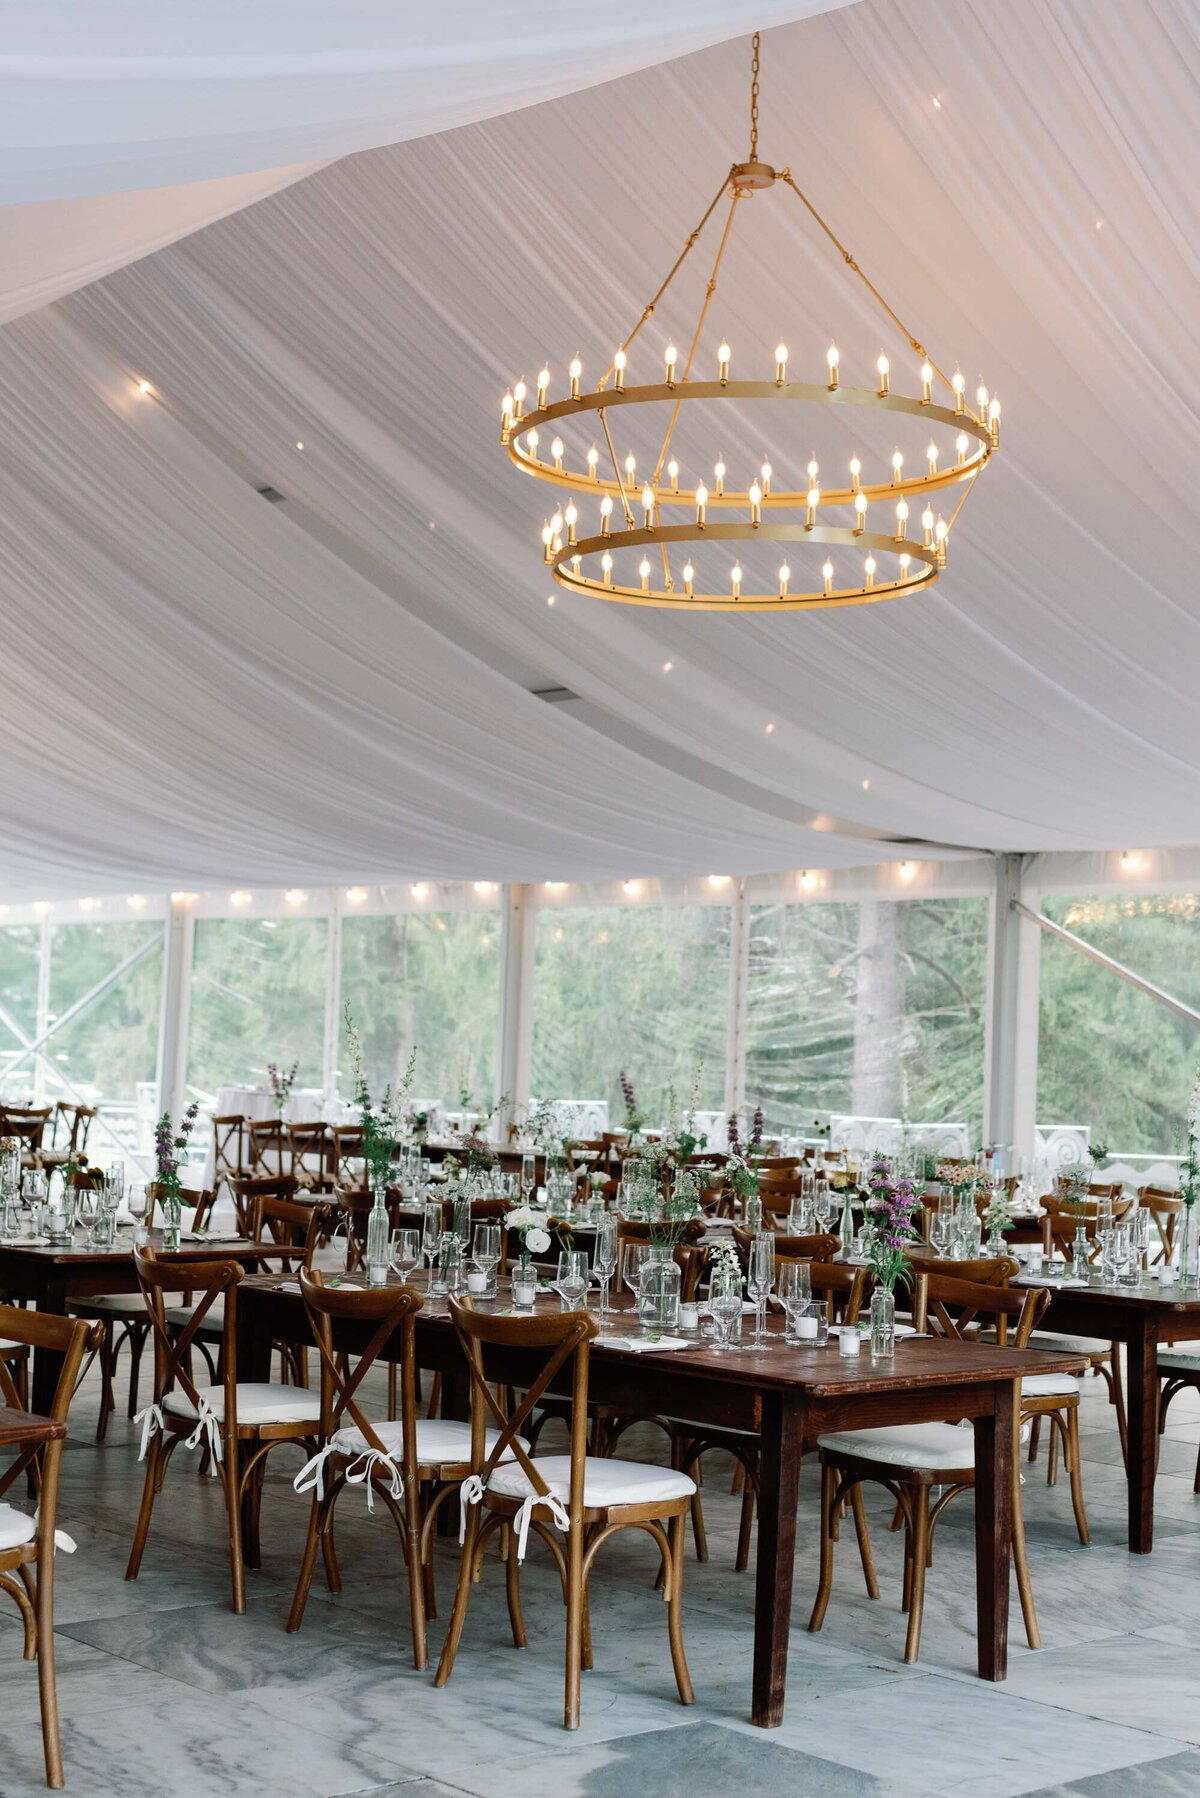 indoor reception at wilburton inn with farm tables, glassware, and lit chandeliers